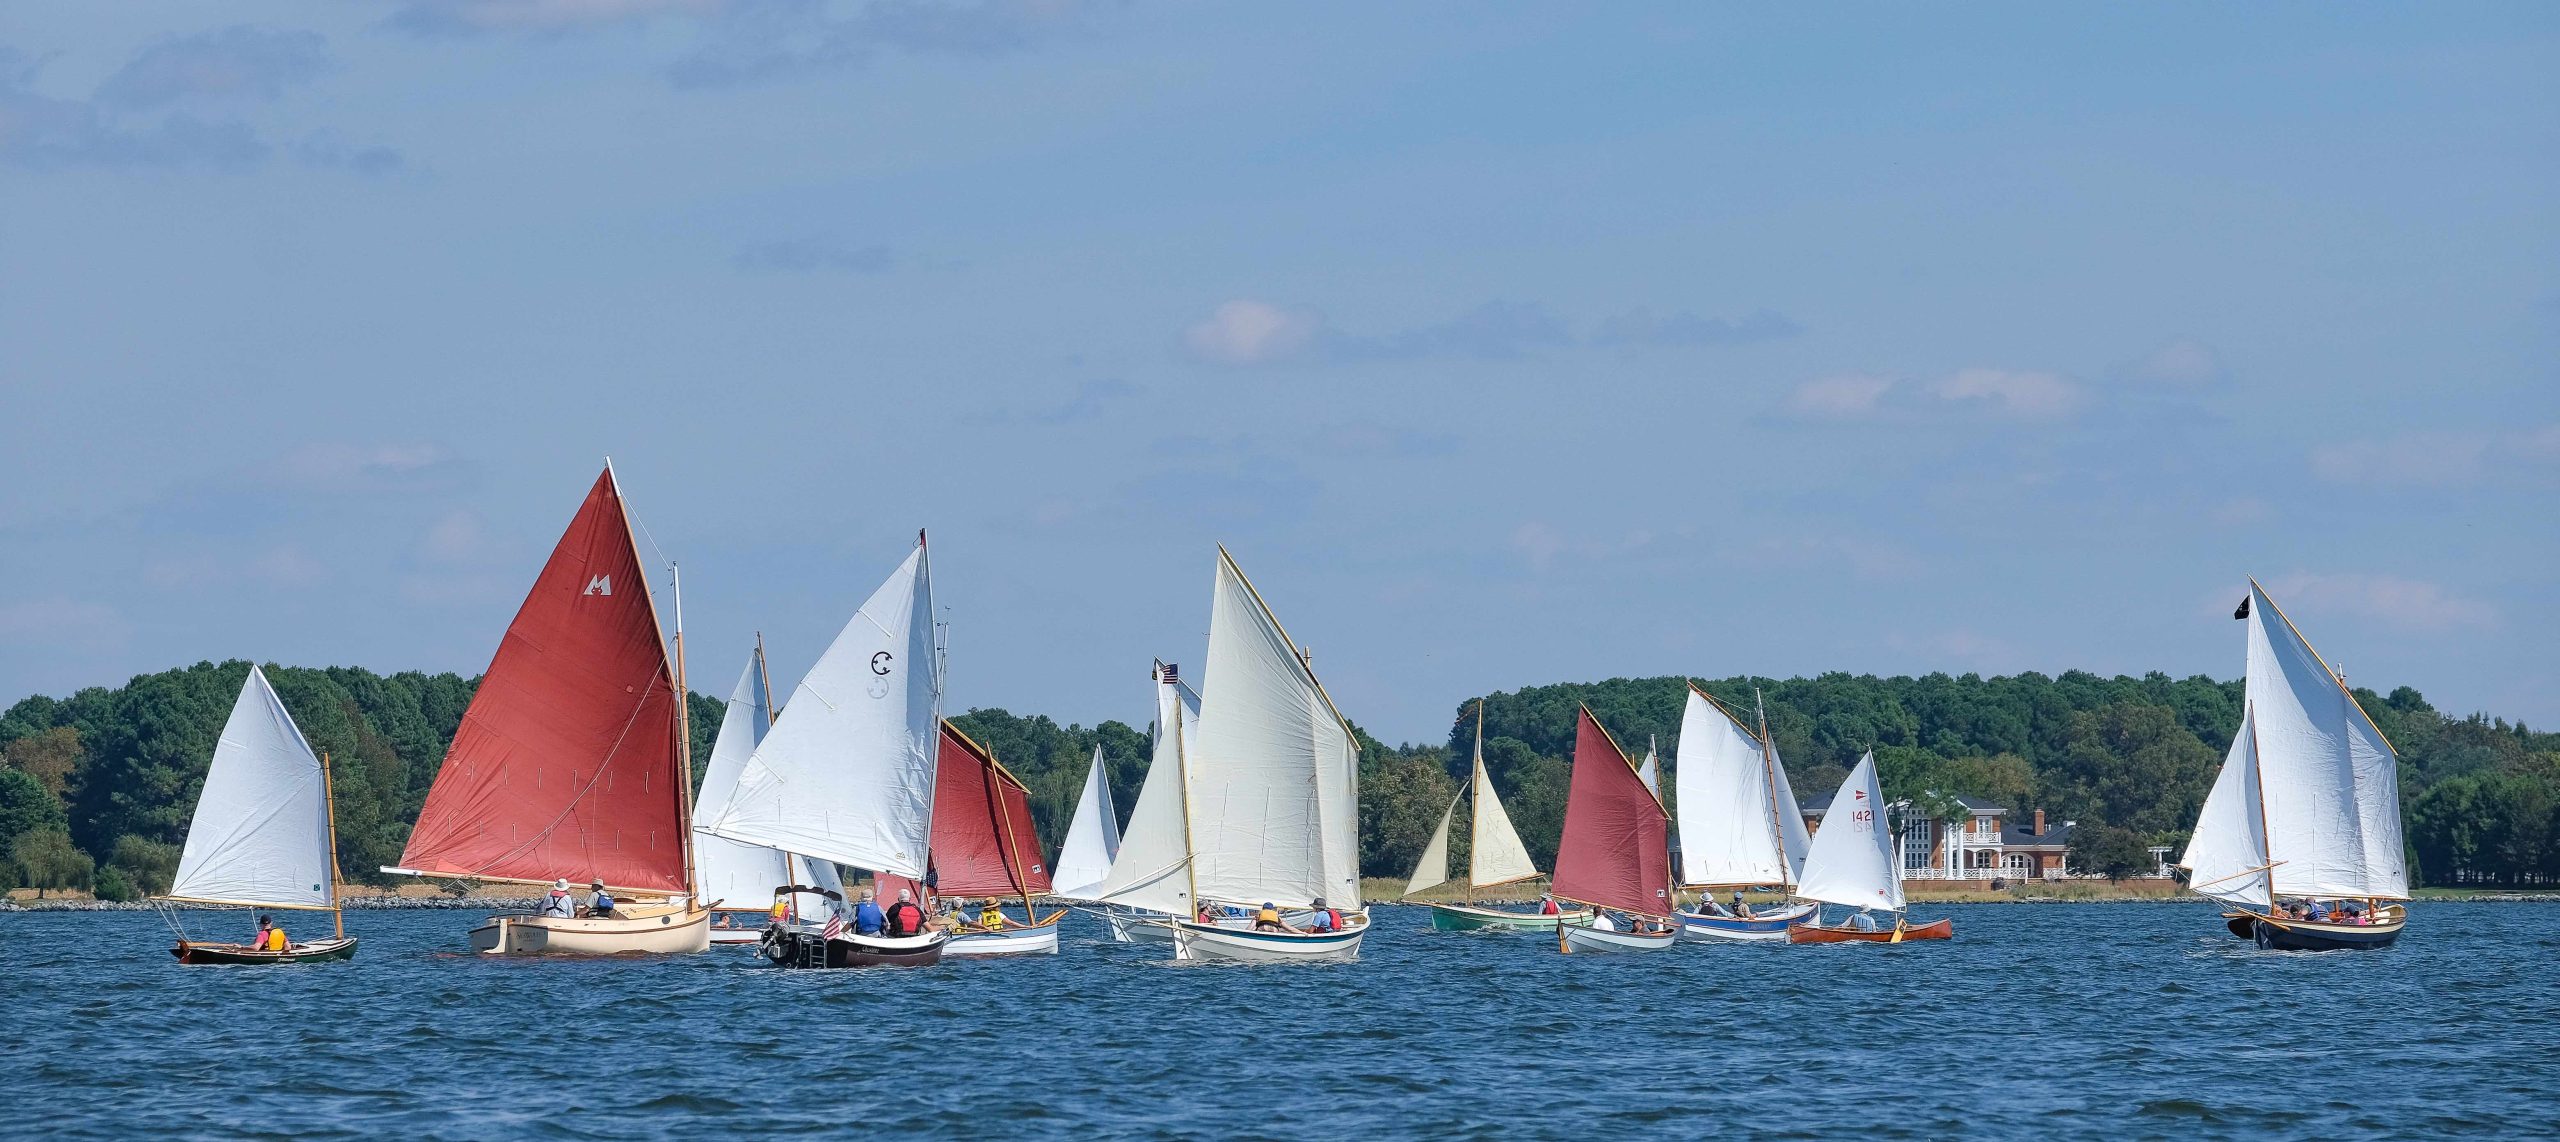 CBMM hosts one of the nation’s largest gatherings of small boat enthusiasts and unique watercraft at Mid-Atlantic Small Craft Festival XXXX on Oct. 6-8. (Photo by George Sass)